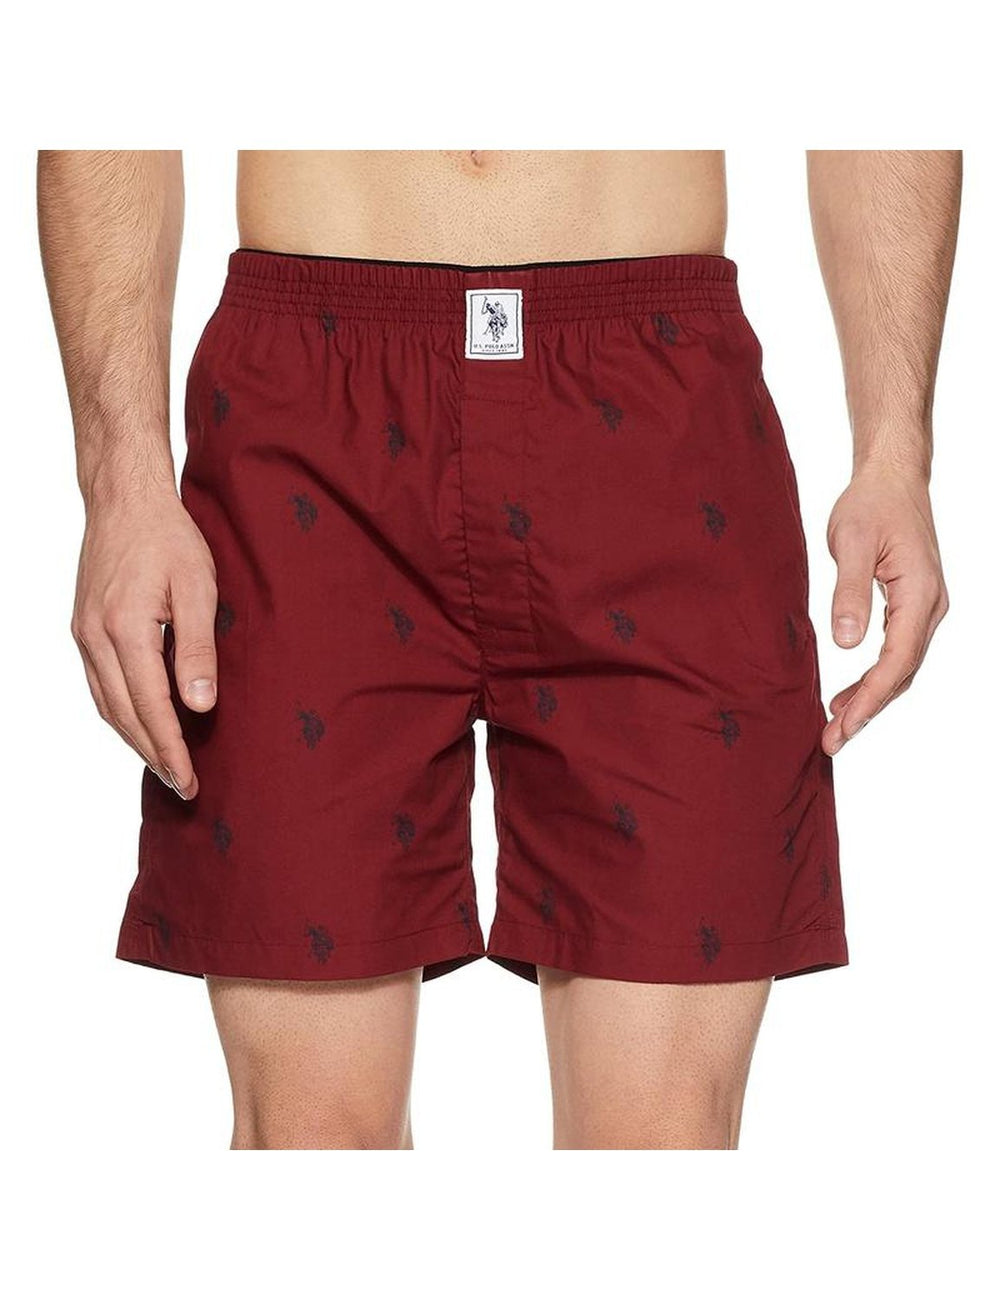 US Polo Printed Maroon Boxer Shorts for Men